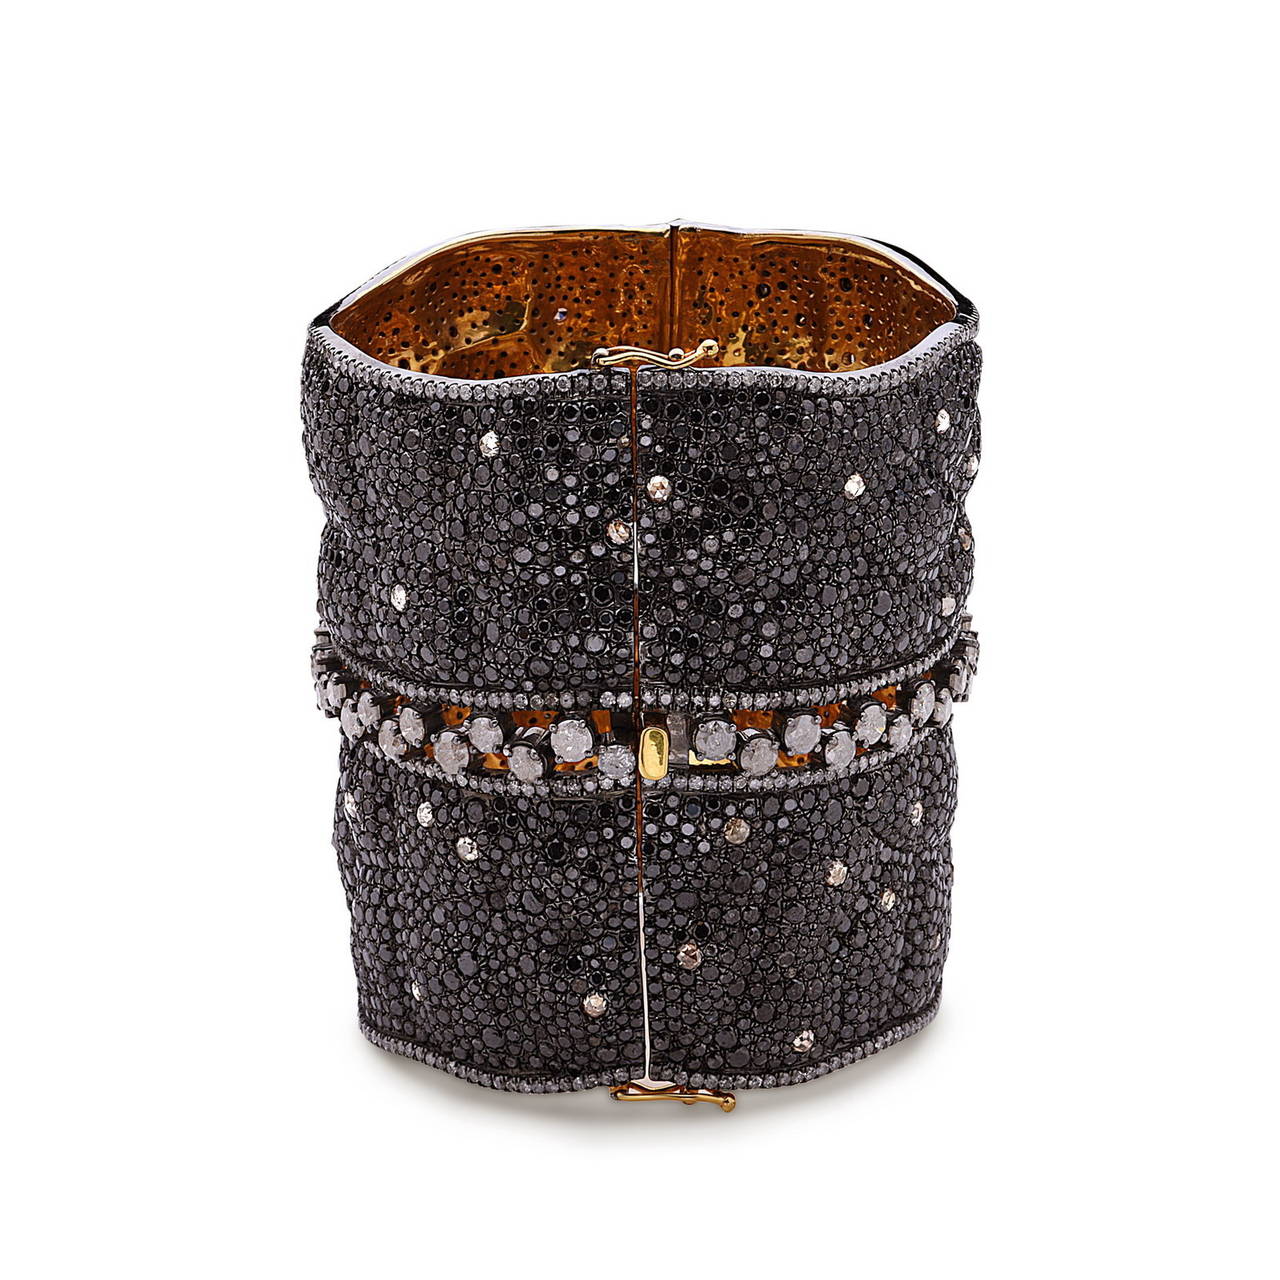 18K Gold & Silver this Bodacious Bangle is studded with Black & White Diamonds. This bangle narrows down on your wrist and is openable to put on very easily with safety clasp. Goes perfect with any evening gown. Total diamond weight is